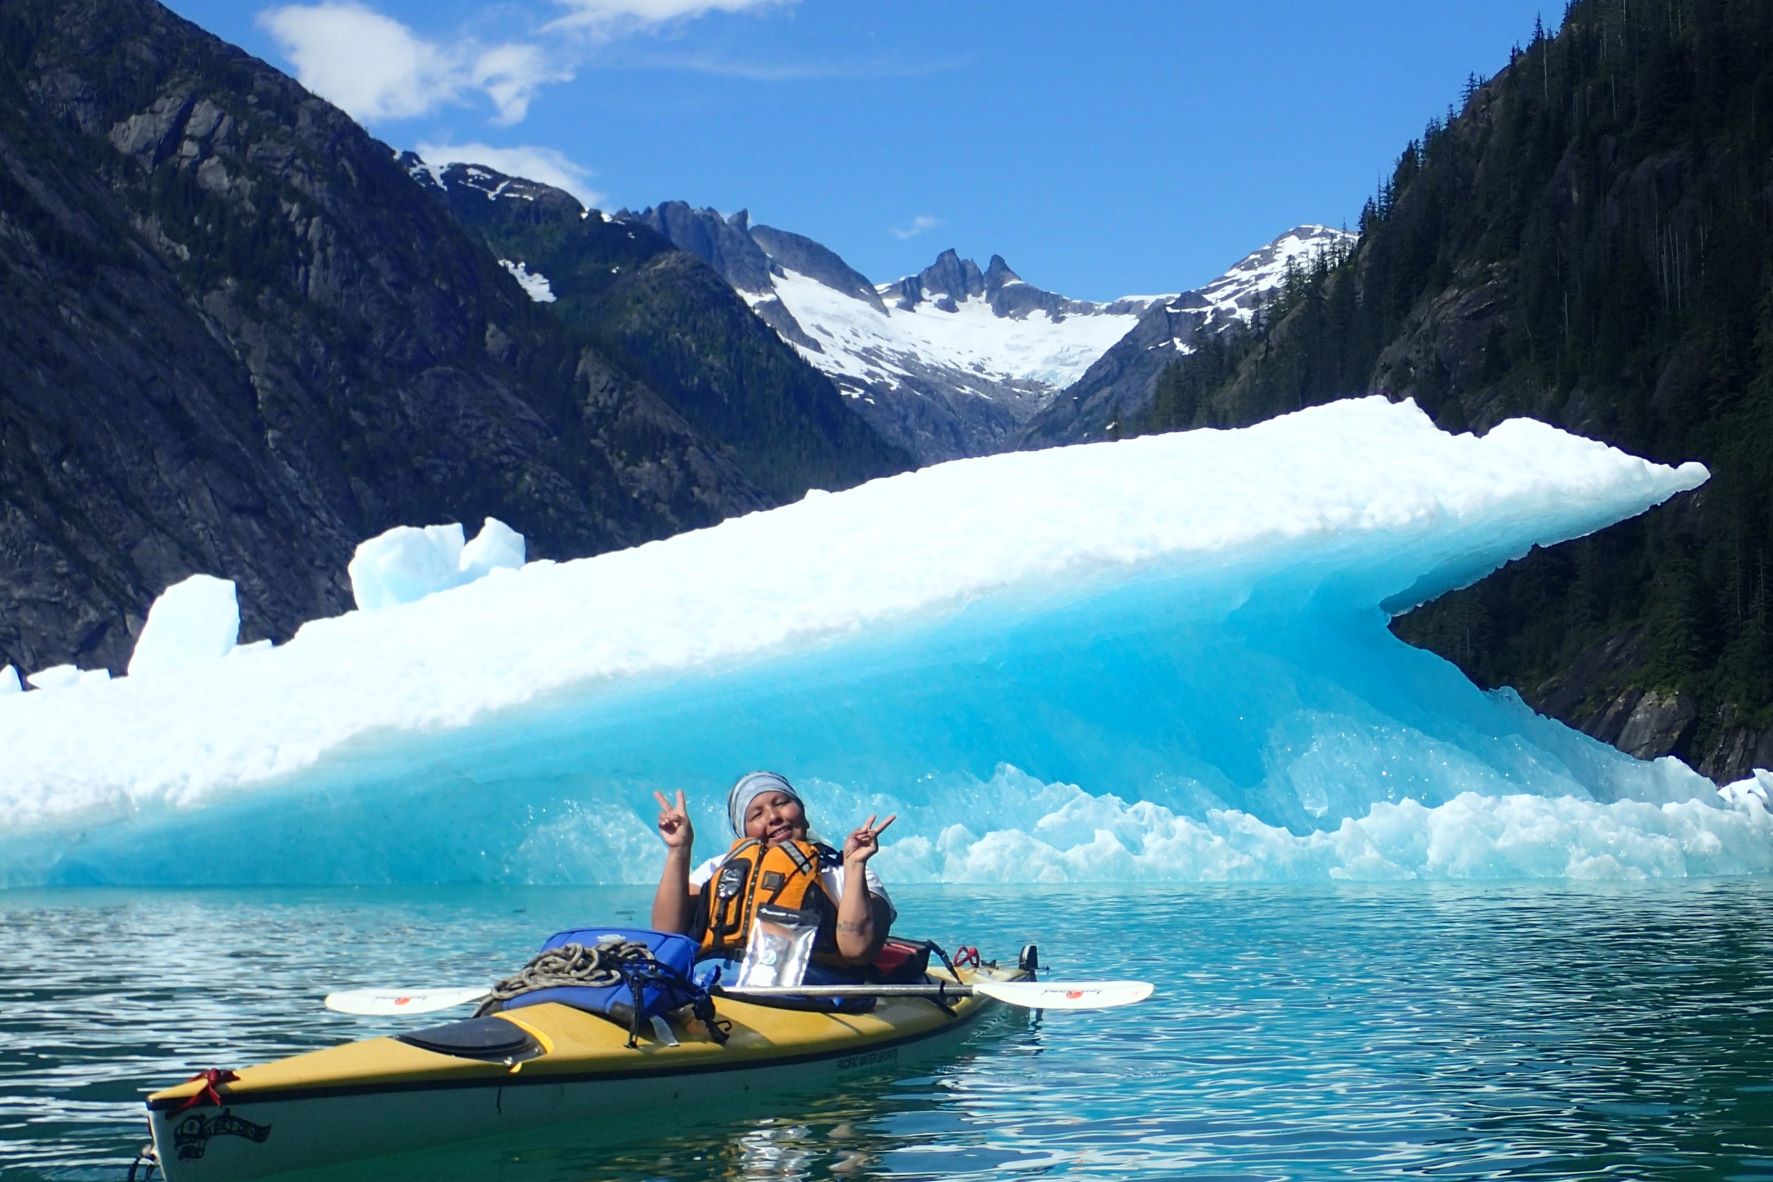 Stacey Skan smiles in a kayak in front of an iceberg.